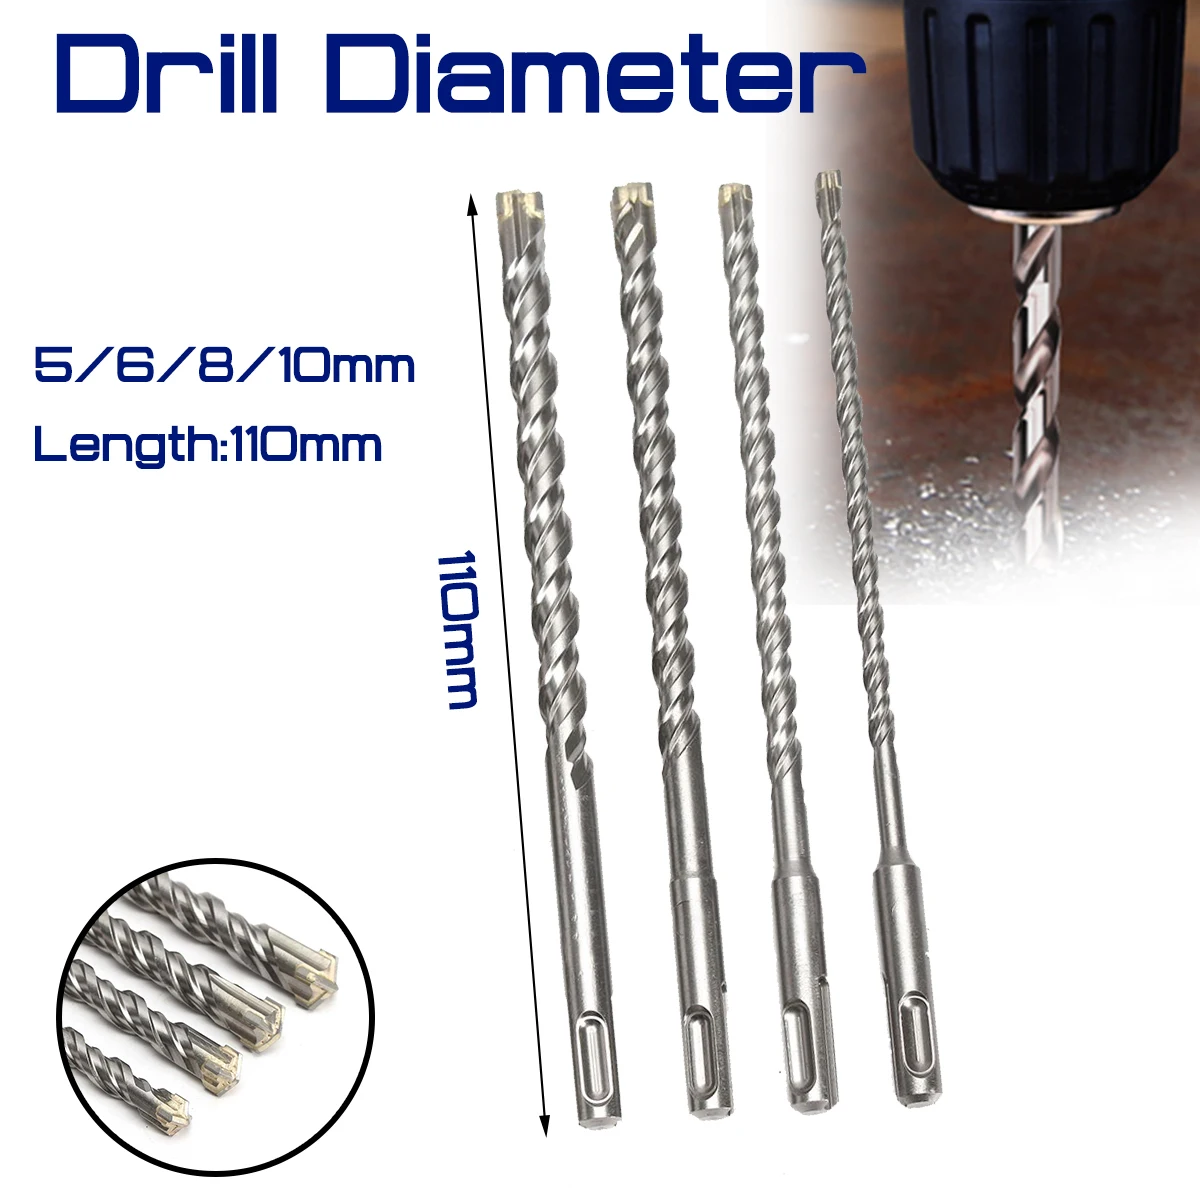 

For Electric Dril 11cm Concrete Drill Bit Double SDS Plus Slot Masonry Hammer Head Tool 5/6/8/10mm High Speed White Steel Wrench